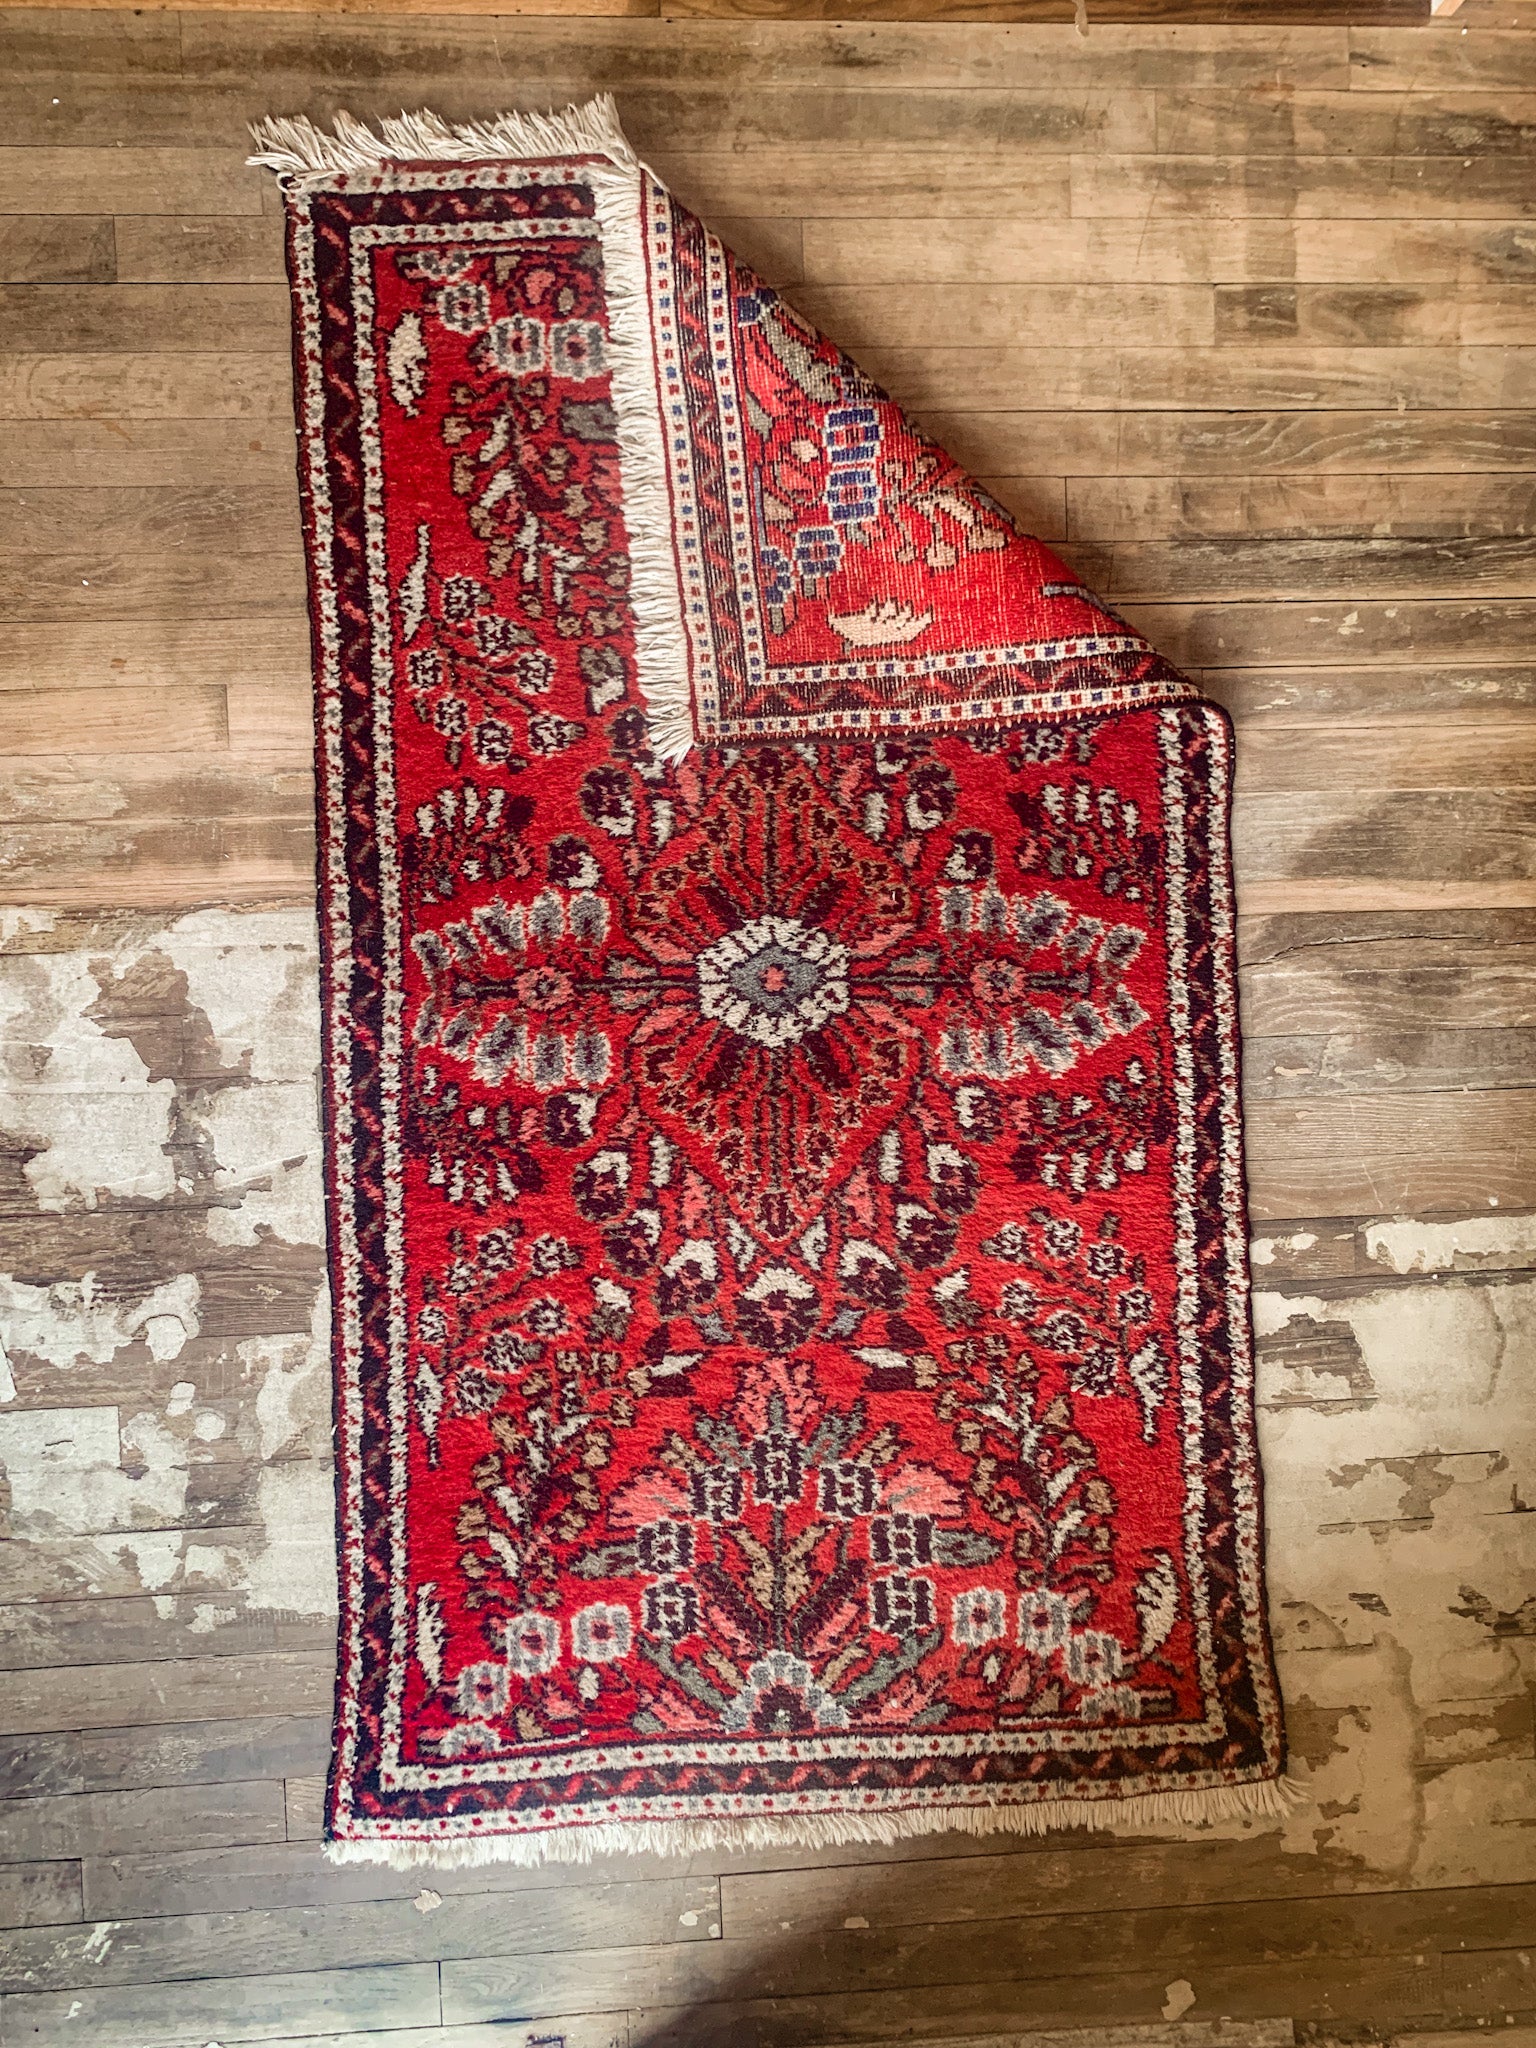 iranian lilihan rug with corner folded over to reveal weave pattern underneath